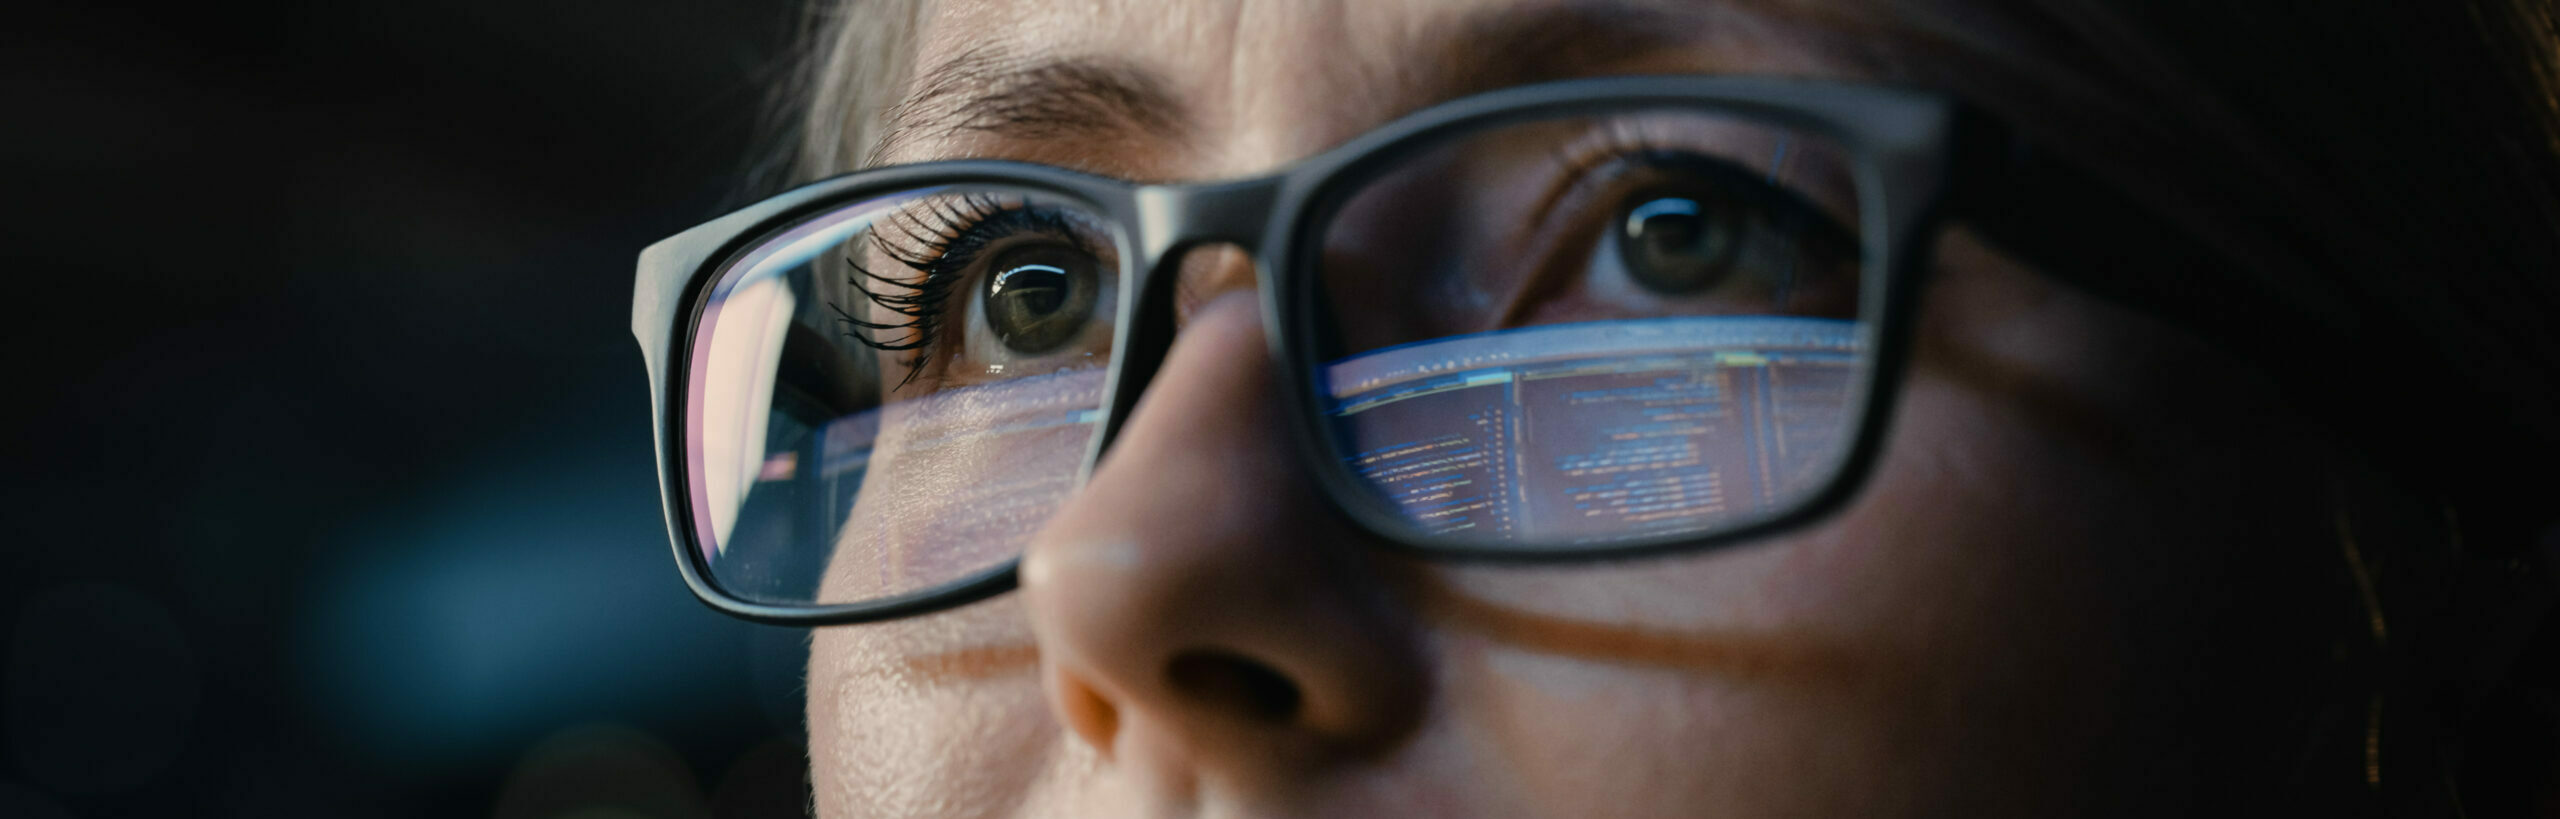 Close-up Portrait of Female Software Engineer Working on Compute